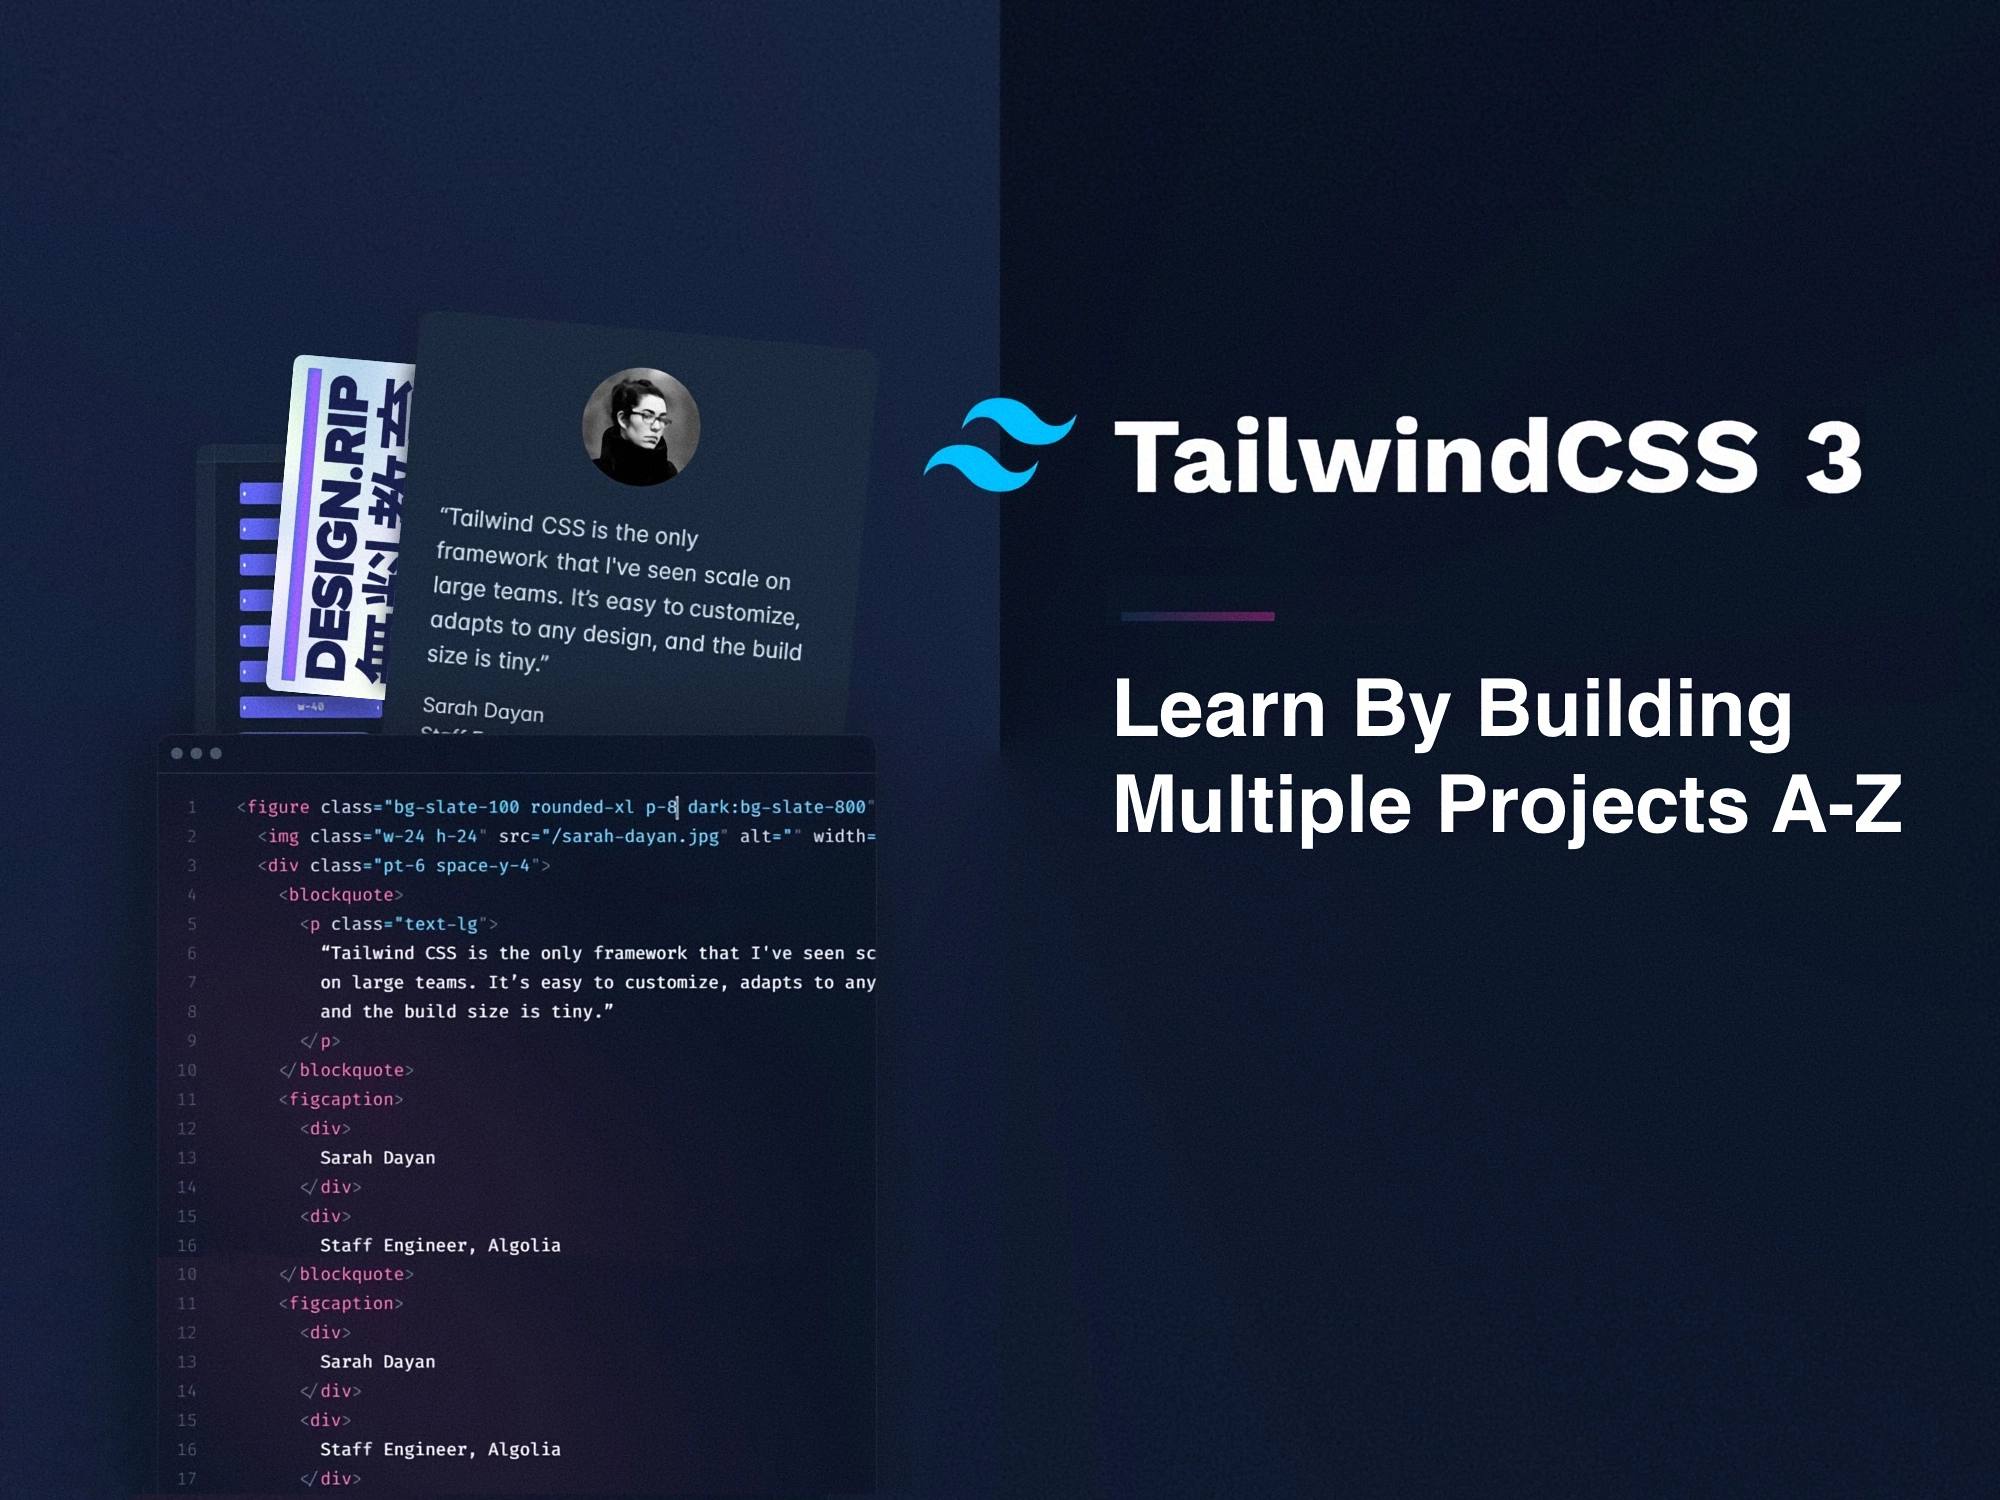 [VIP] Tailwind CSS 3: Learn By Building Multiple Projects A-Z